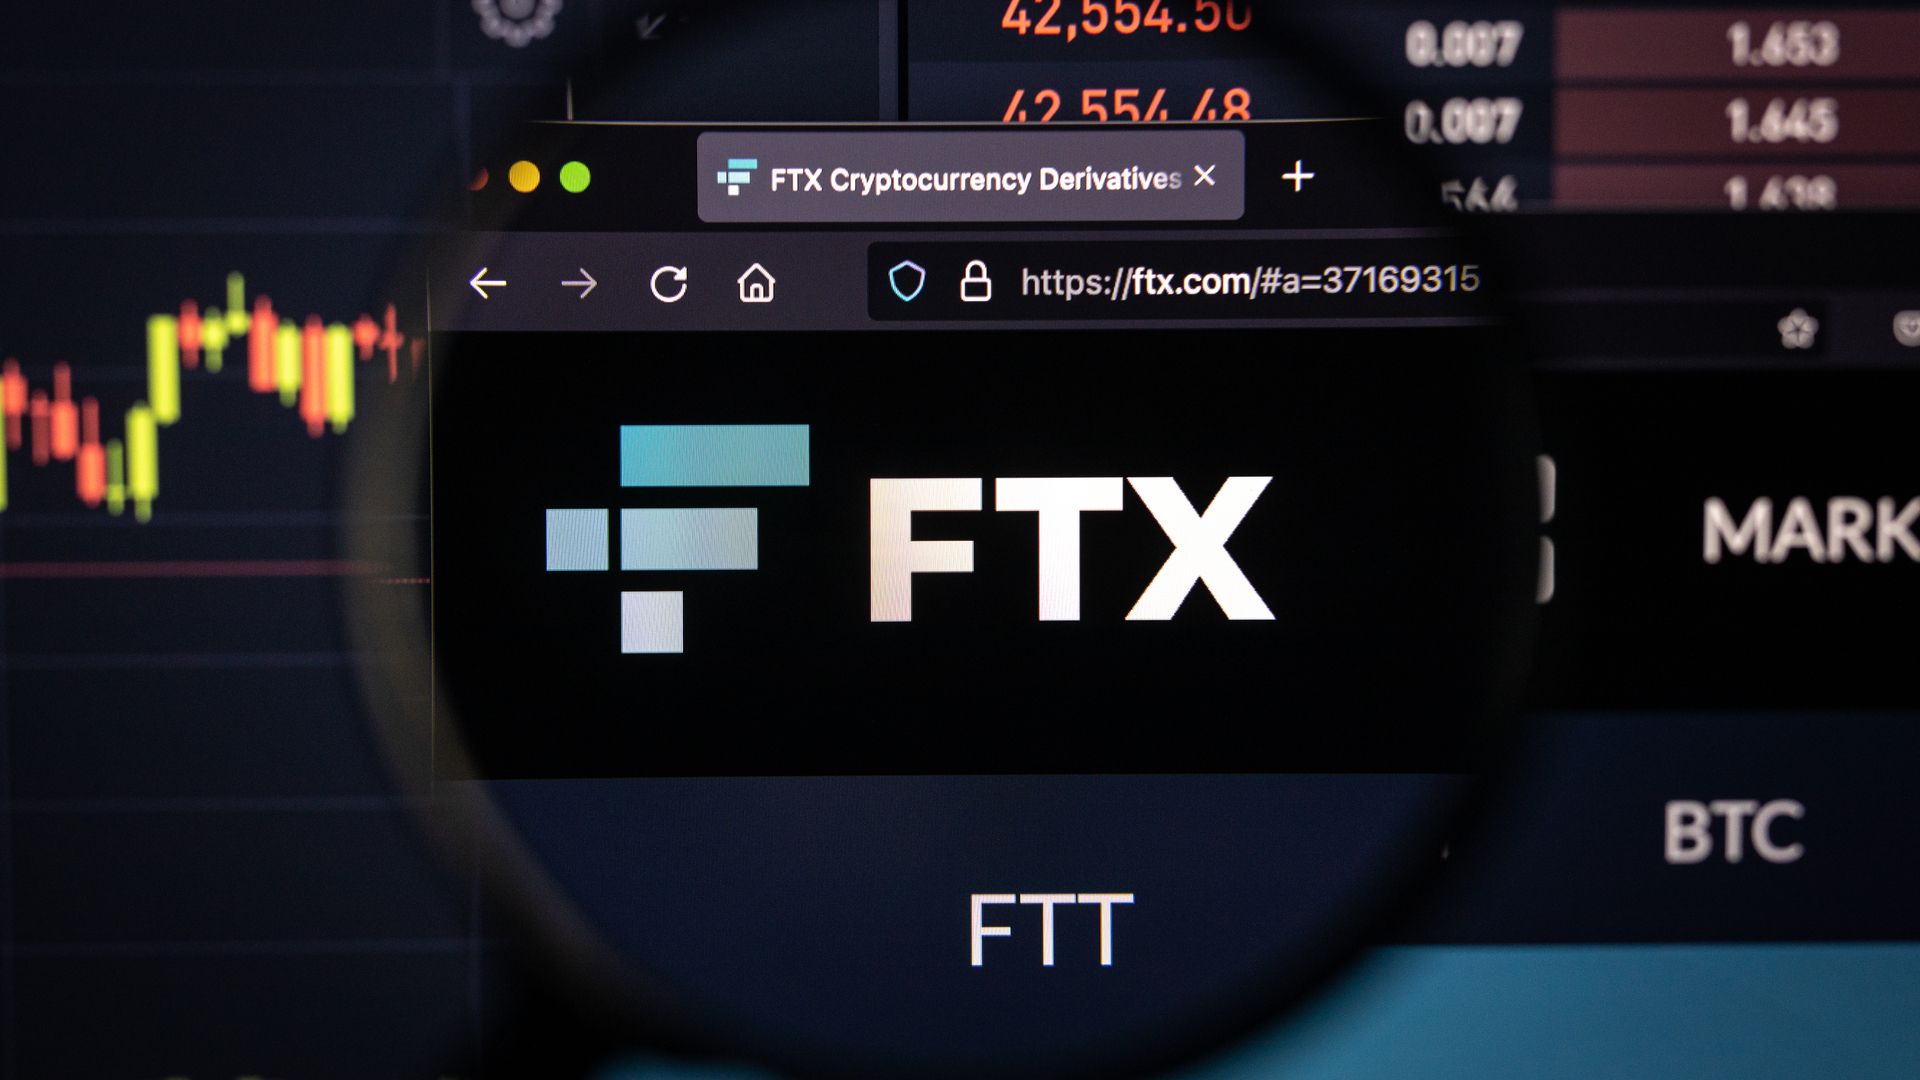 If you are a user of the FTX crypto exchange beware! Crypto exchange FTX hacked and website and FTX app not working due to FTX malware.